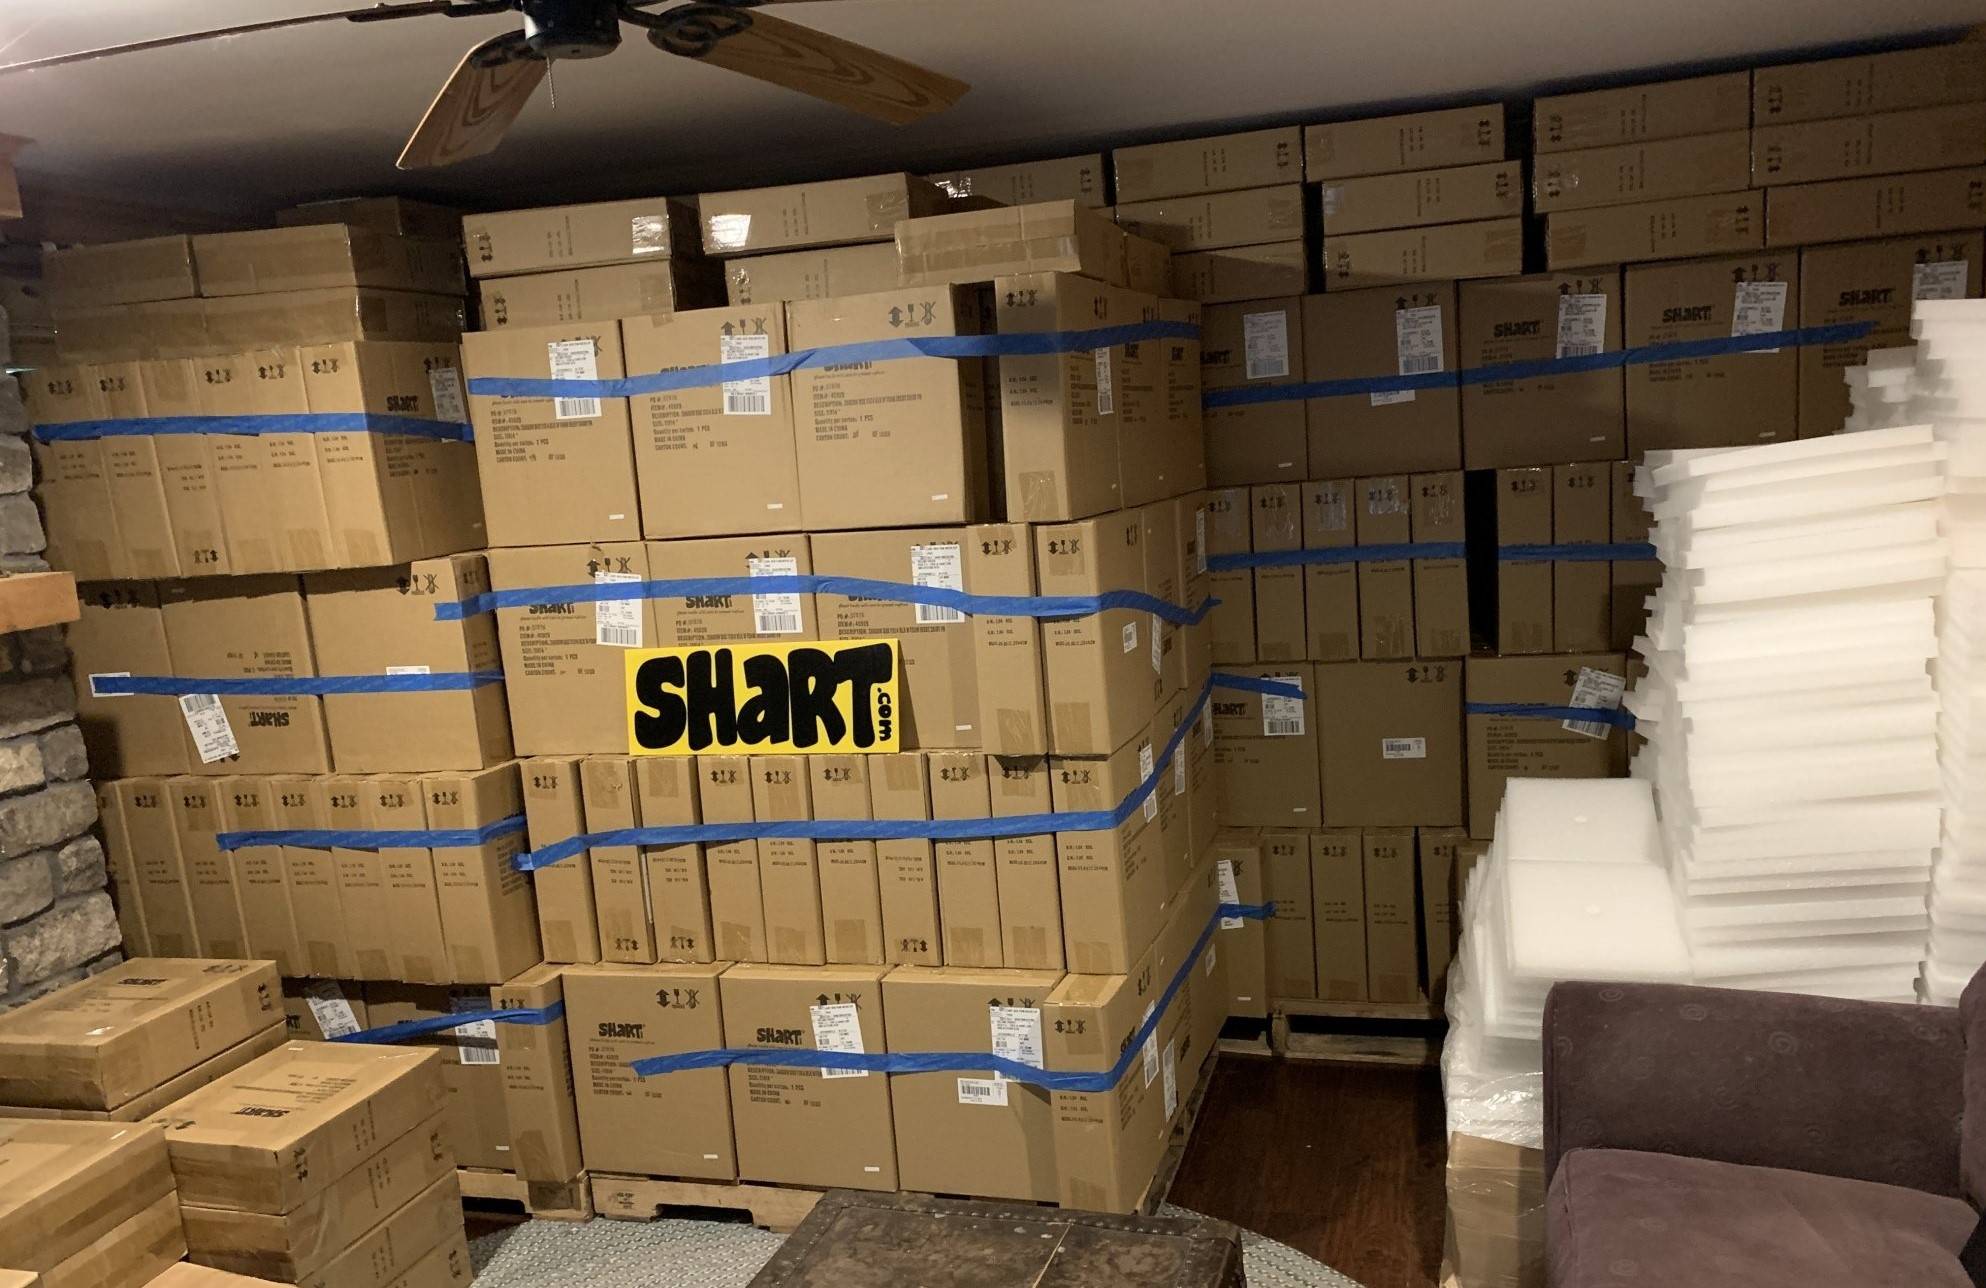 The Biggest Pile of Sharts in the World - Shart Original T-Shirt Frames in the basement of Shart.com Headquarters